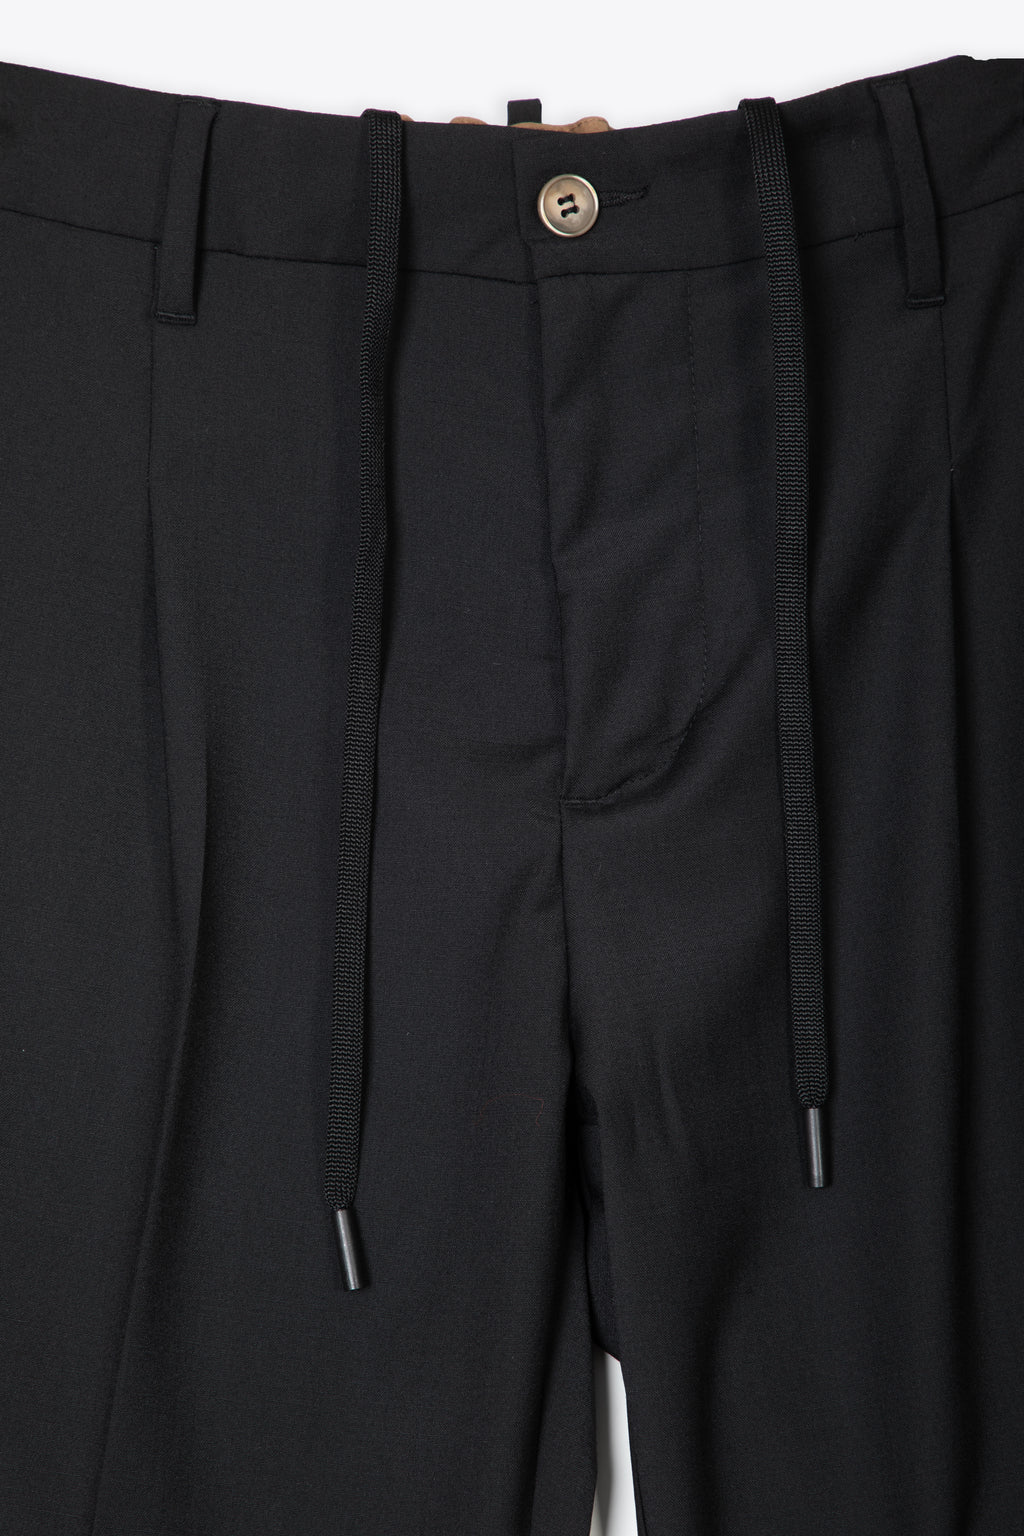 alt-image__Black-wool-tailored-pant-with-front-pleat---Stokholm